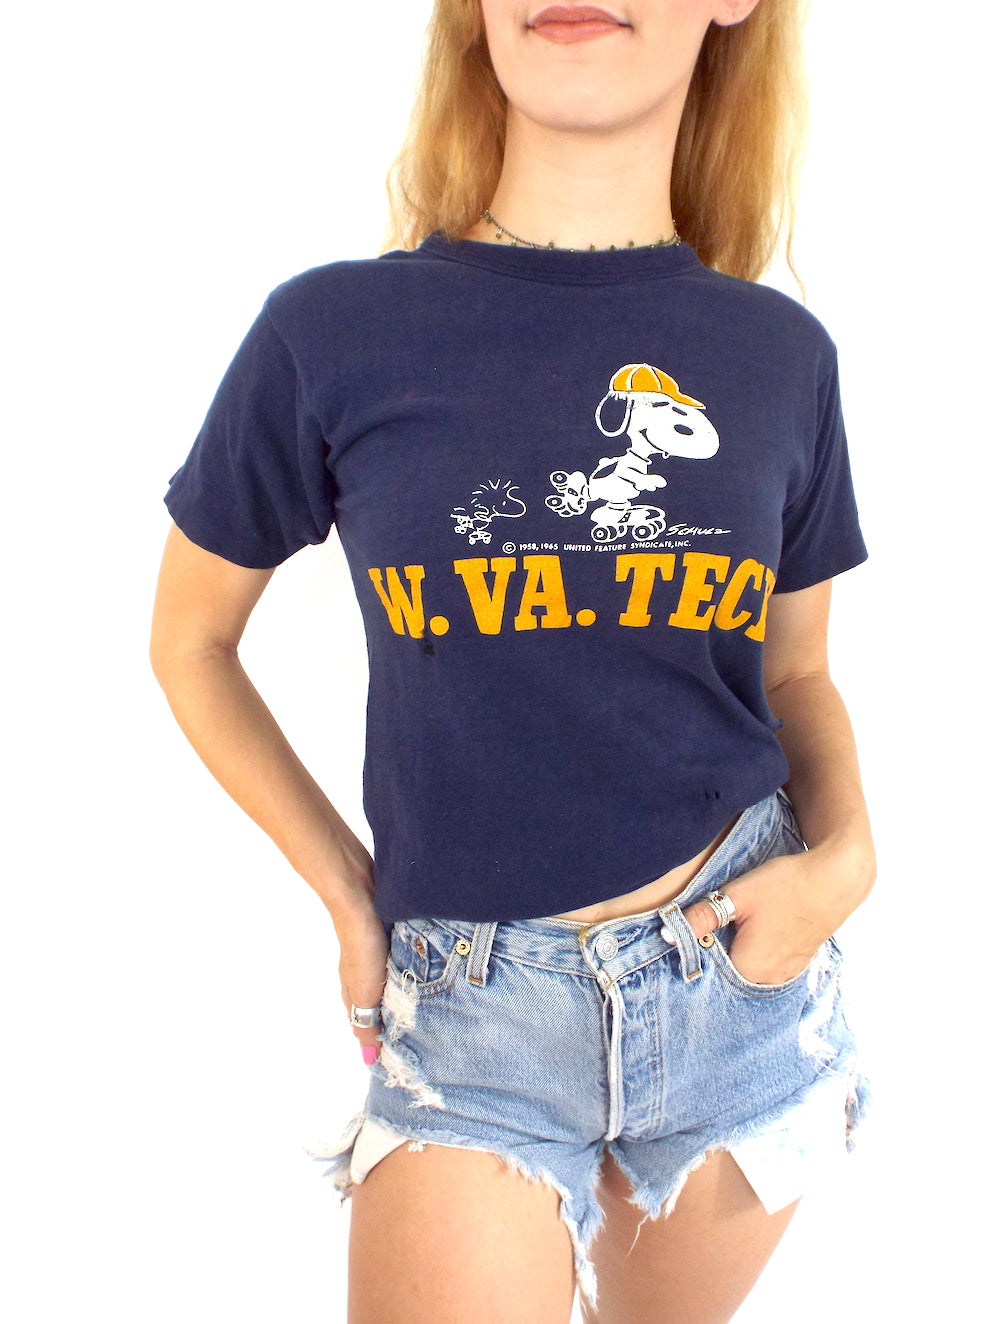 Vintage 70s Destroyed Snoopy West Virginia Tech Tee - Size Small